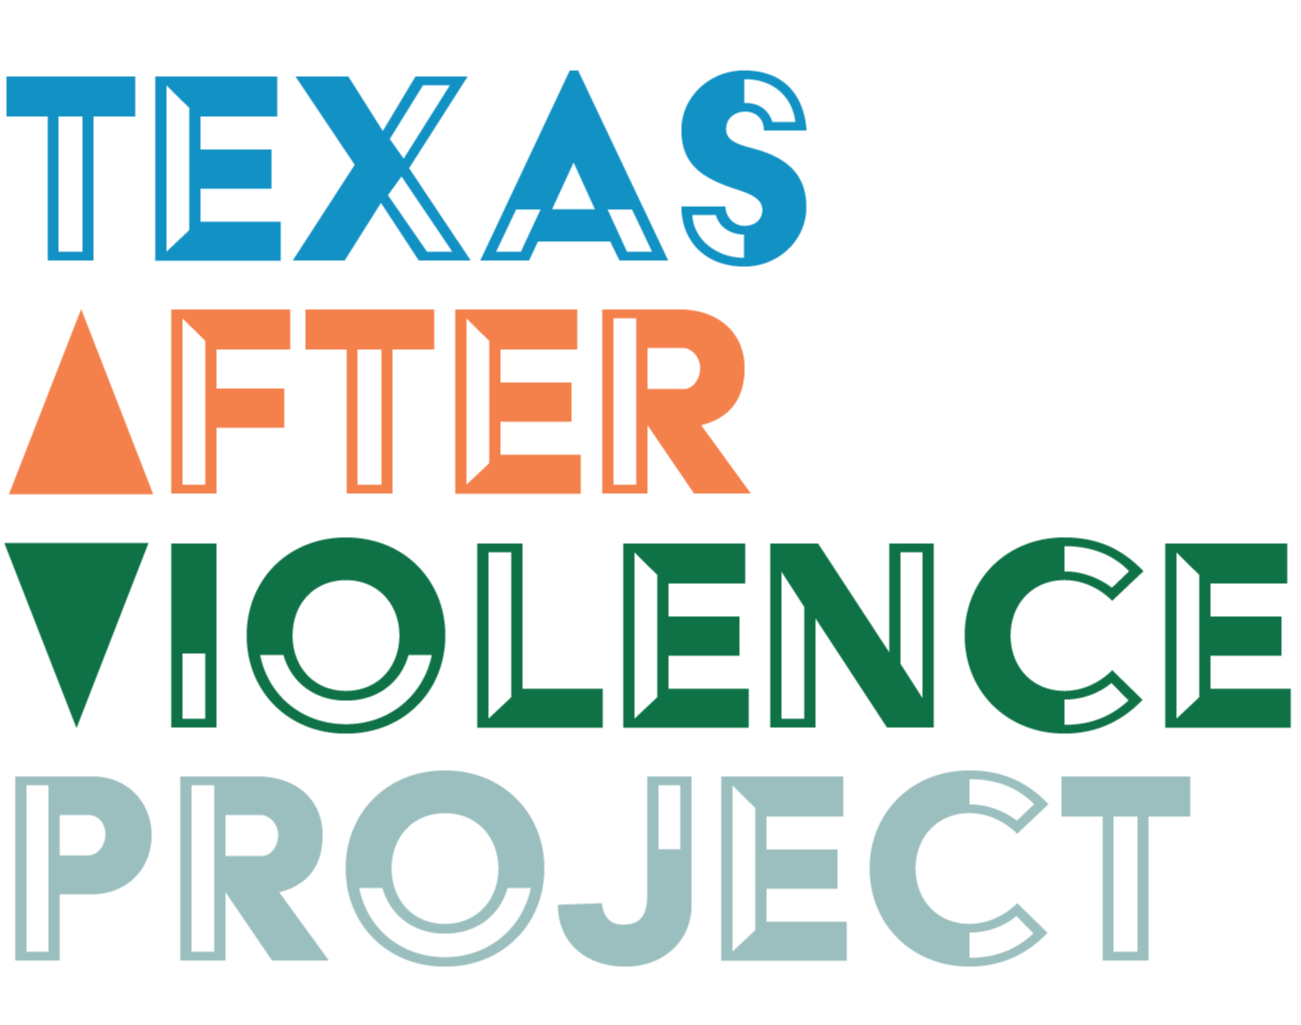 Texas After Violence Project logo